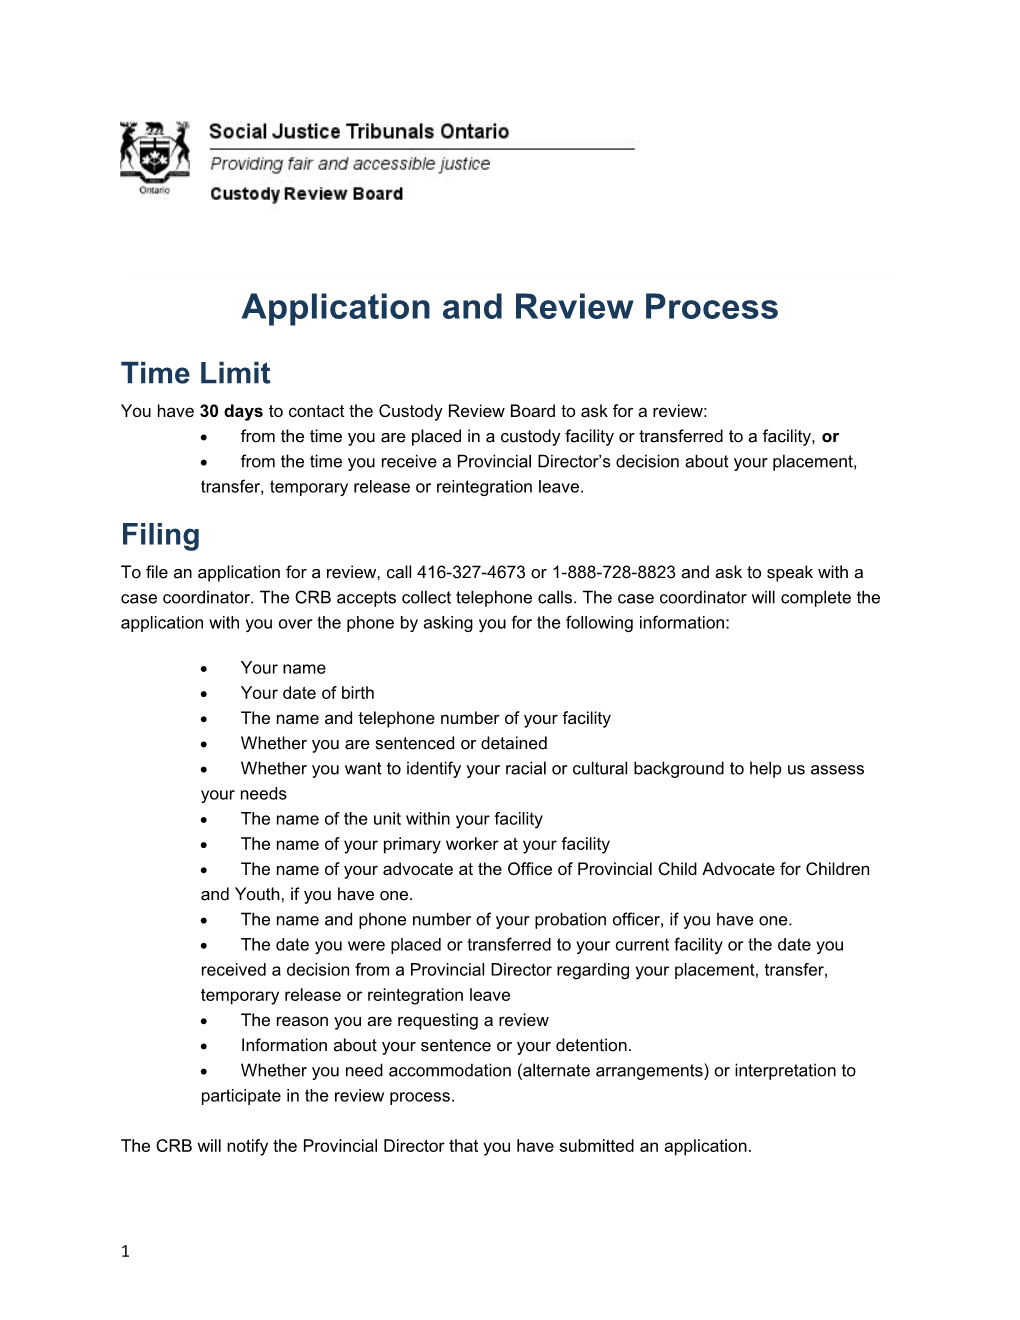 Application and Review Process